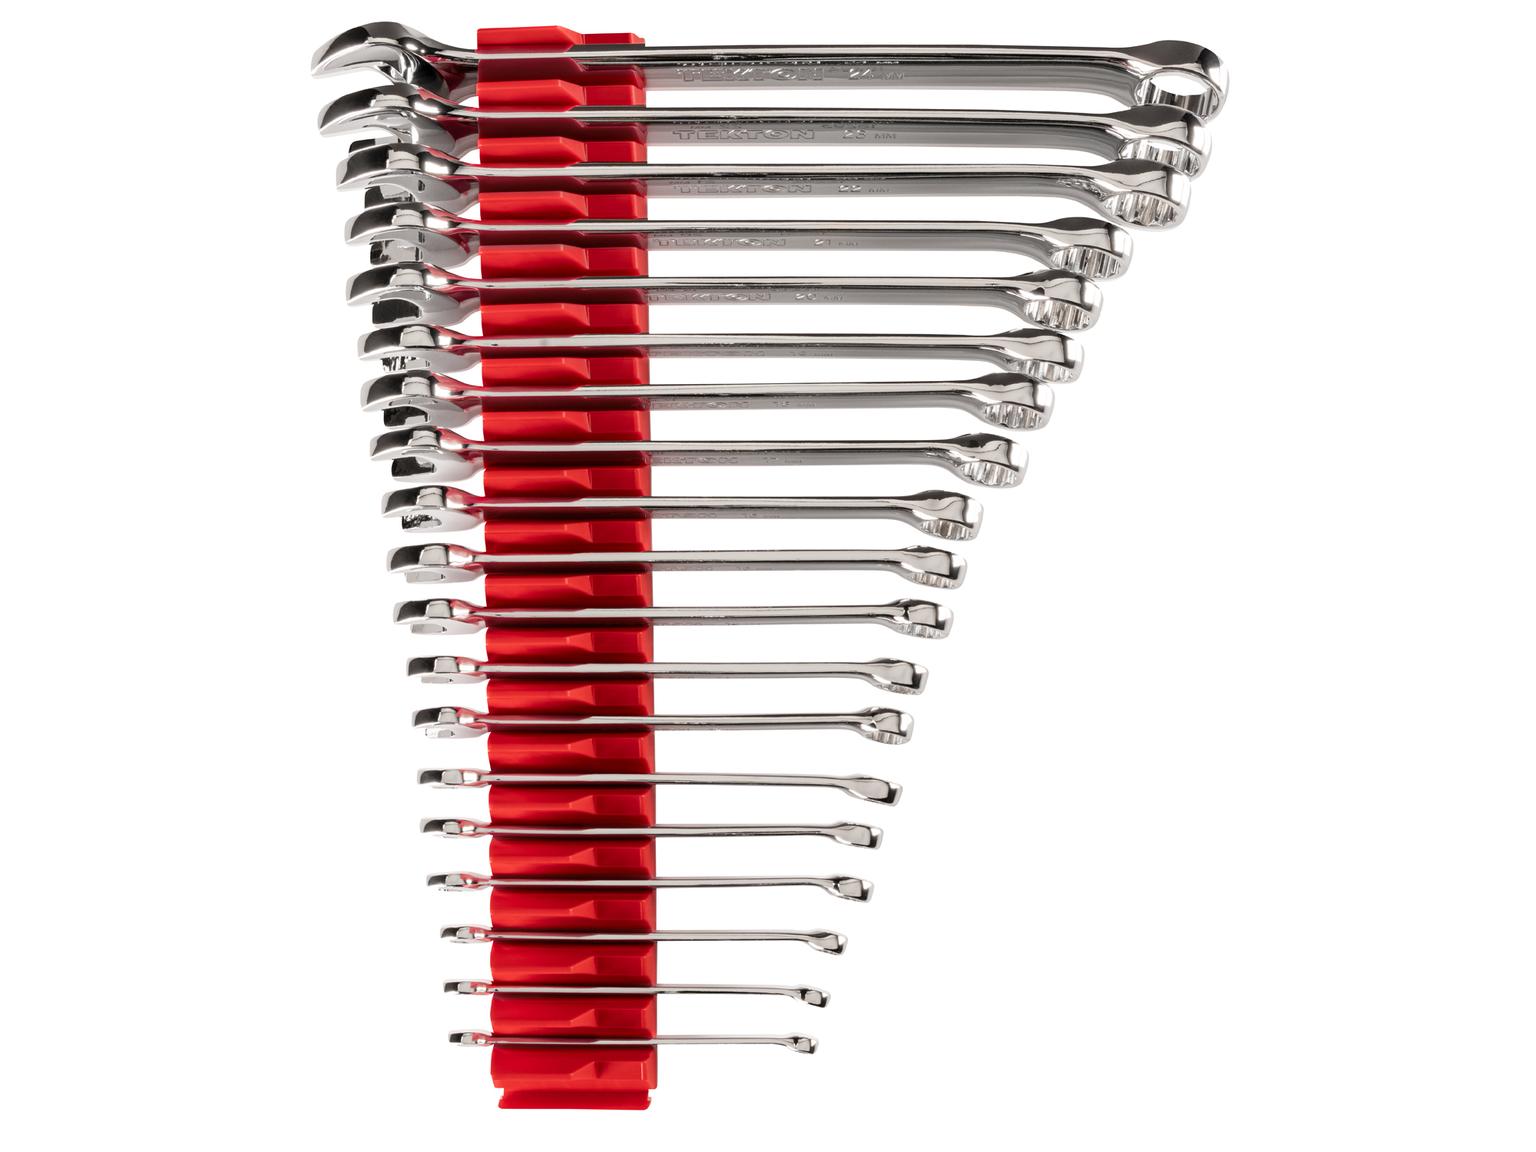 TEKTON WCB95202-T Combination Wrench Set with Modular Slotted Organizer, 19-Piece (6 - 24 mm)